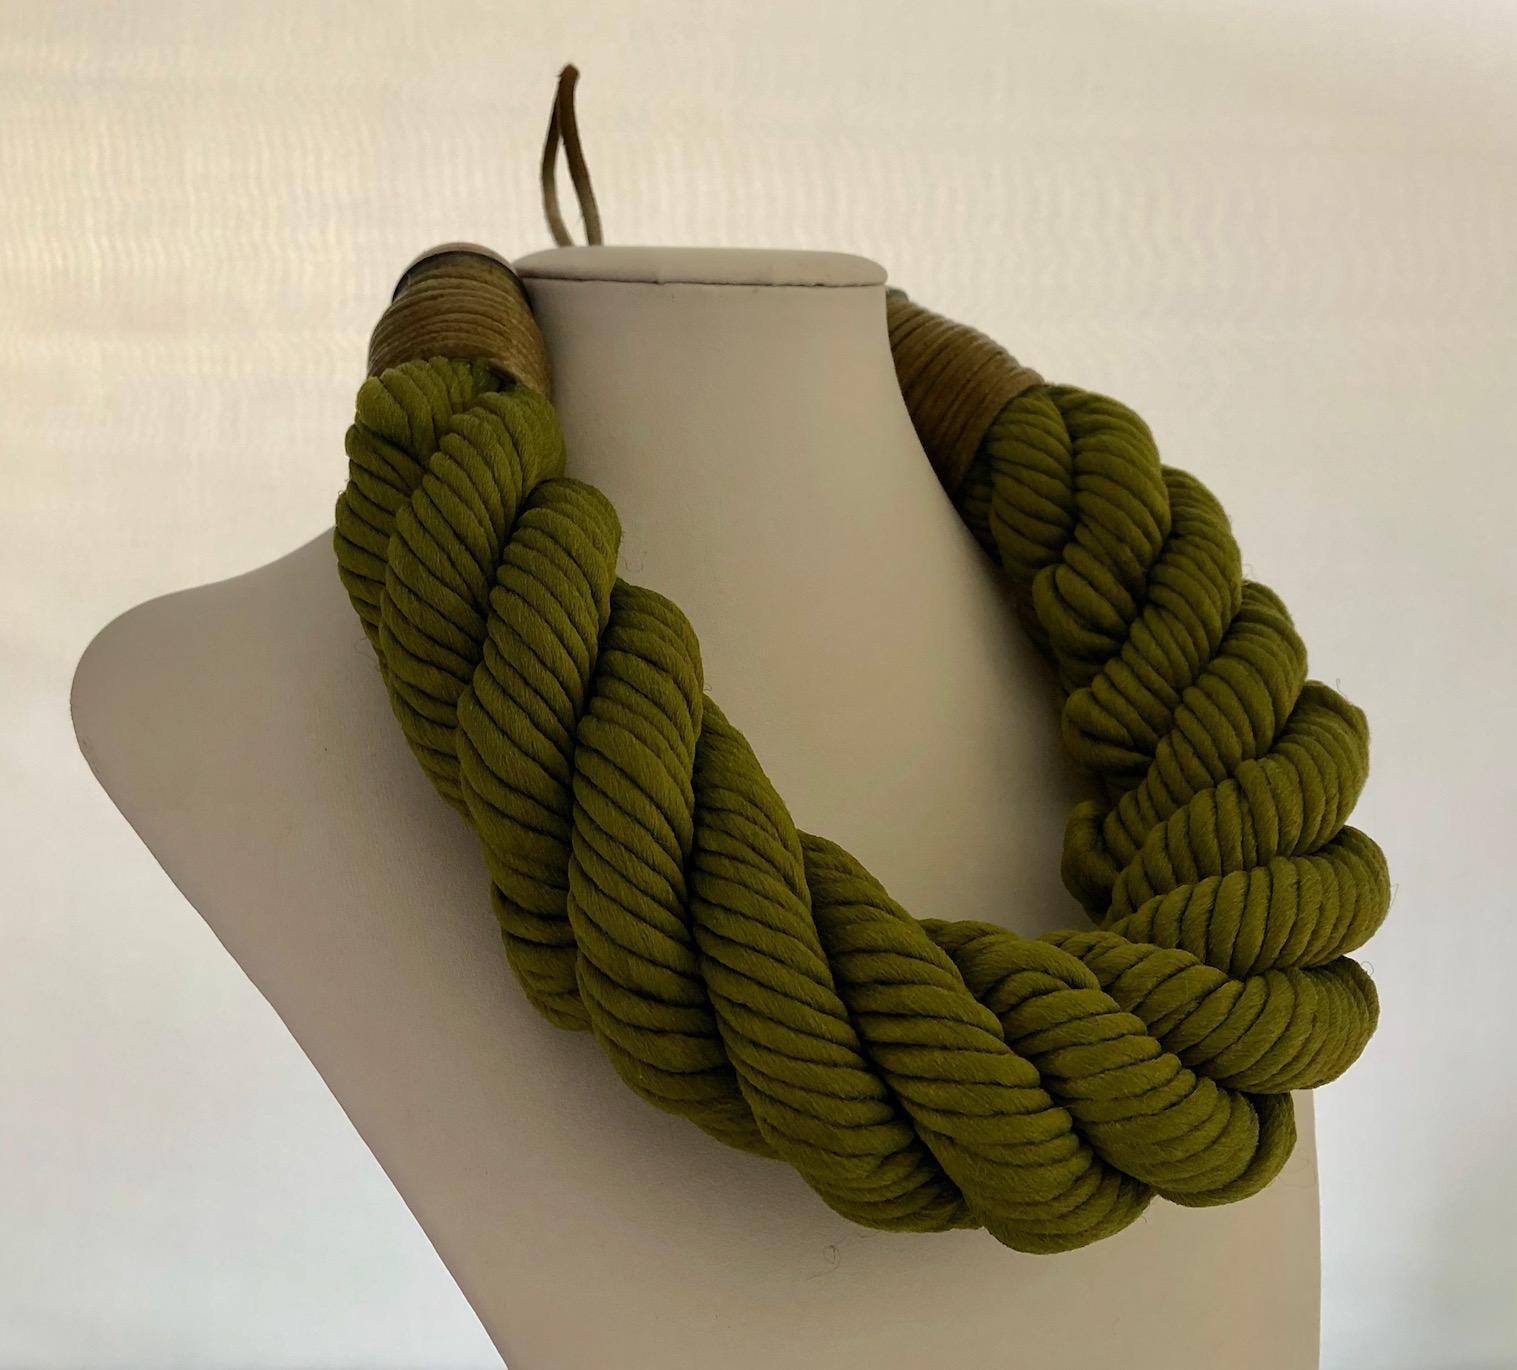 Chic and fashion current sculptural statement bib necklace by Premier Etage, Paris. The monumental necklace is comprised of woven green silk cord. The necklace is hand twisted and manipulated in all Parisian technique to create a bold and unique